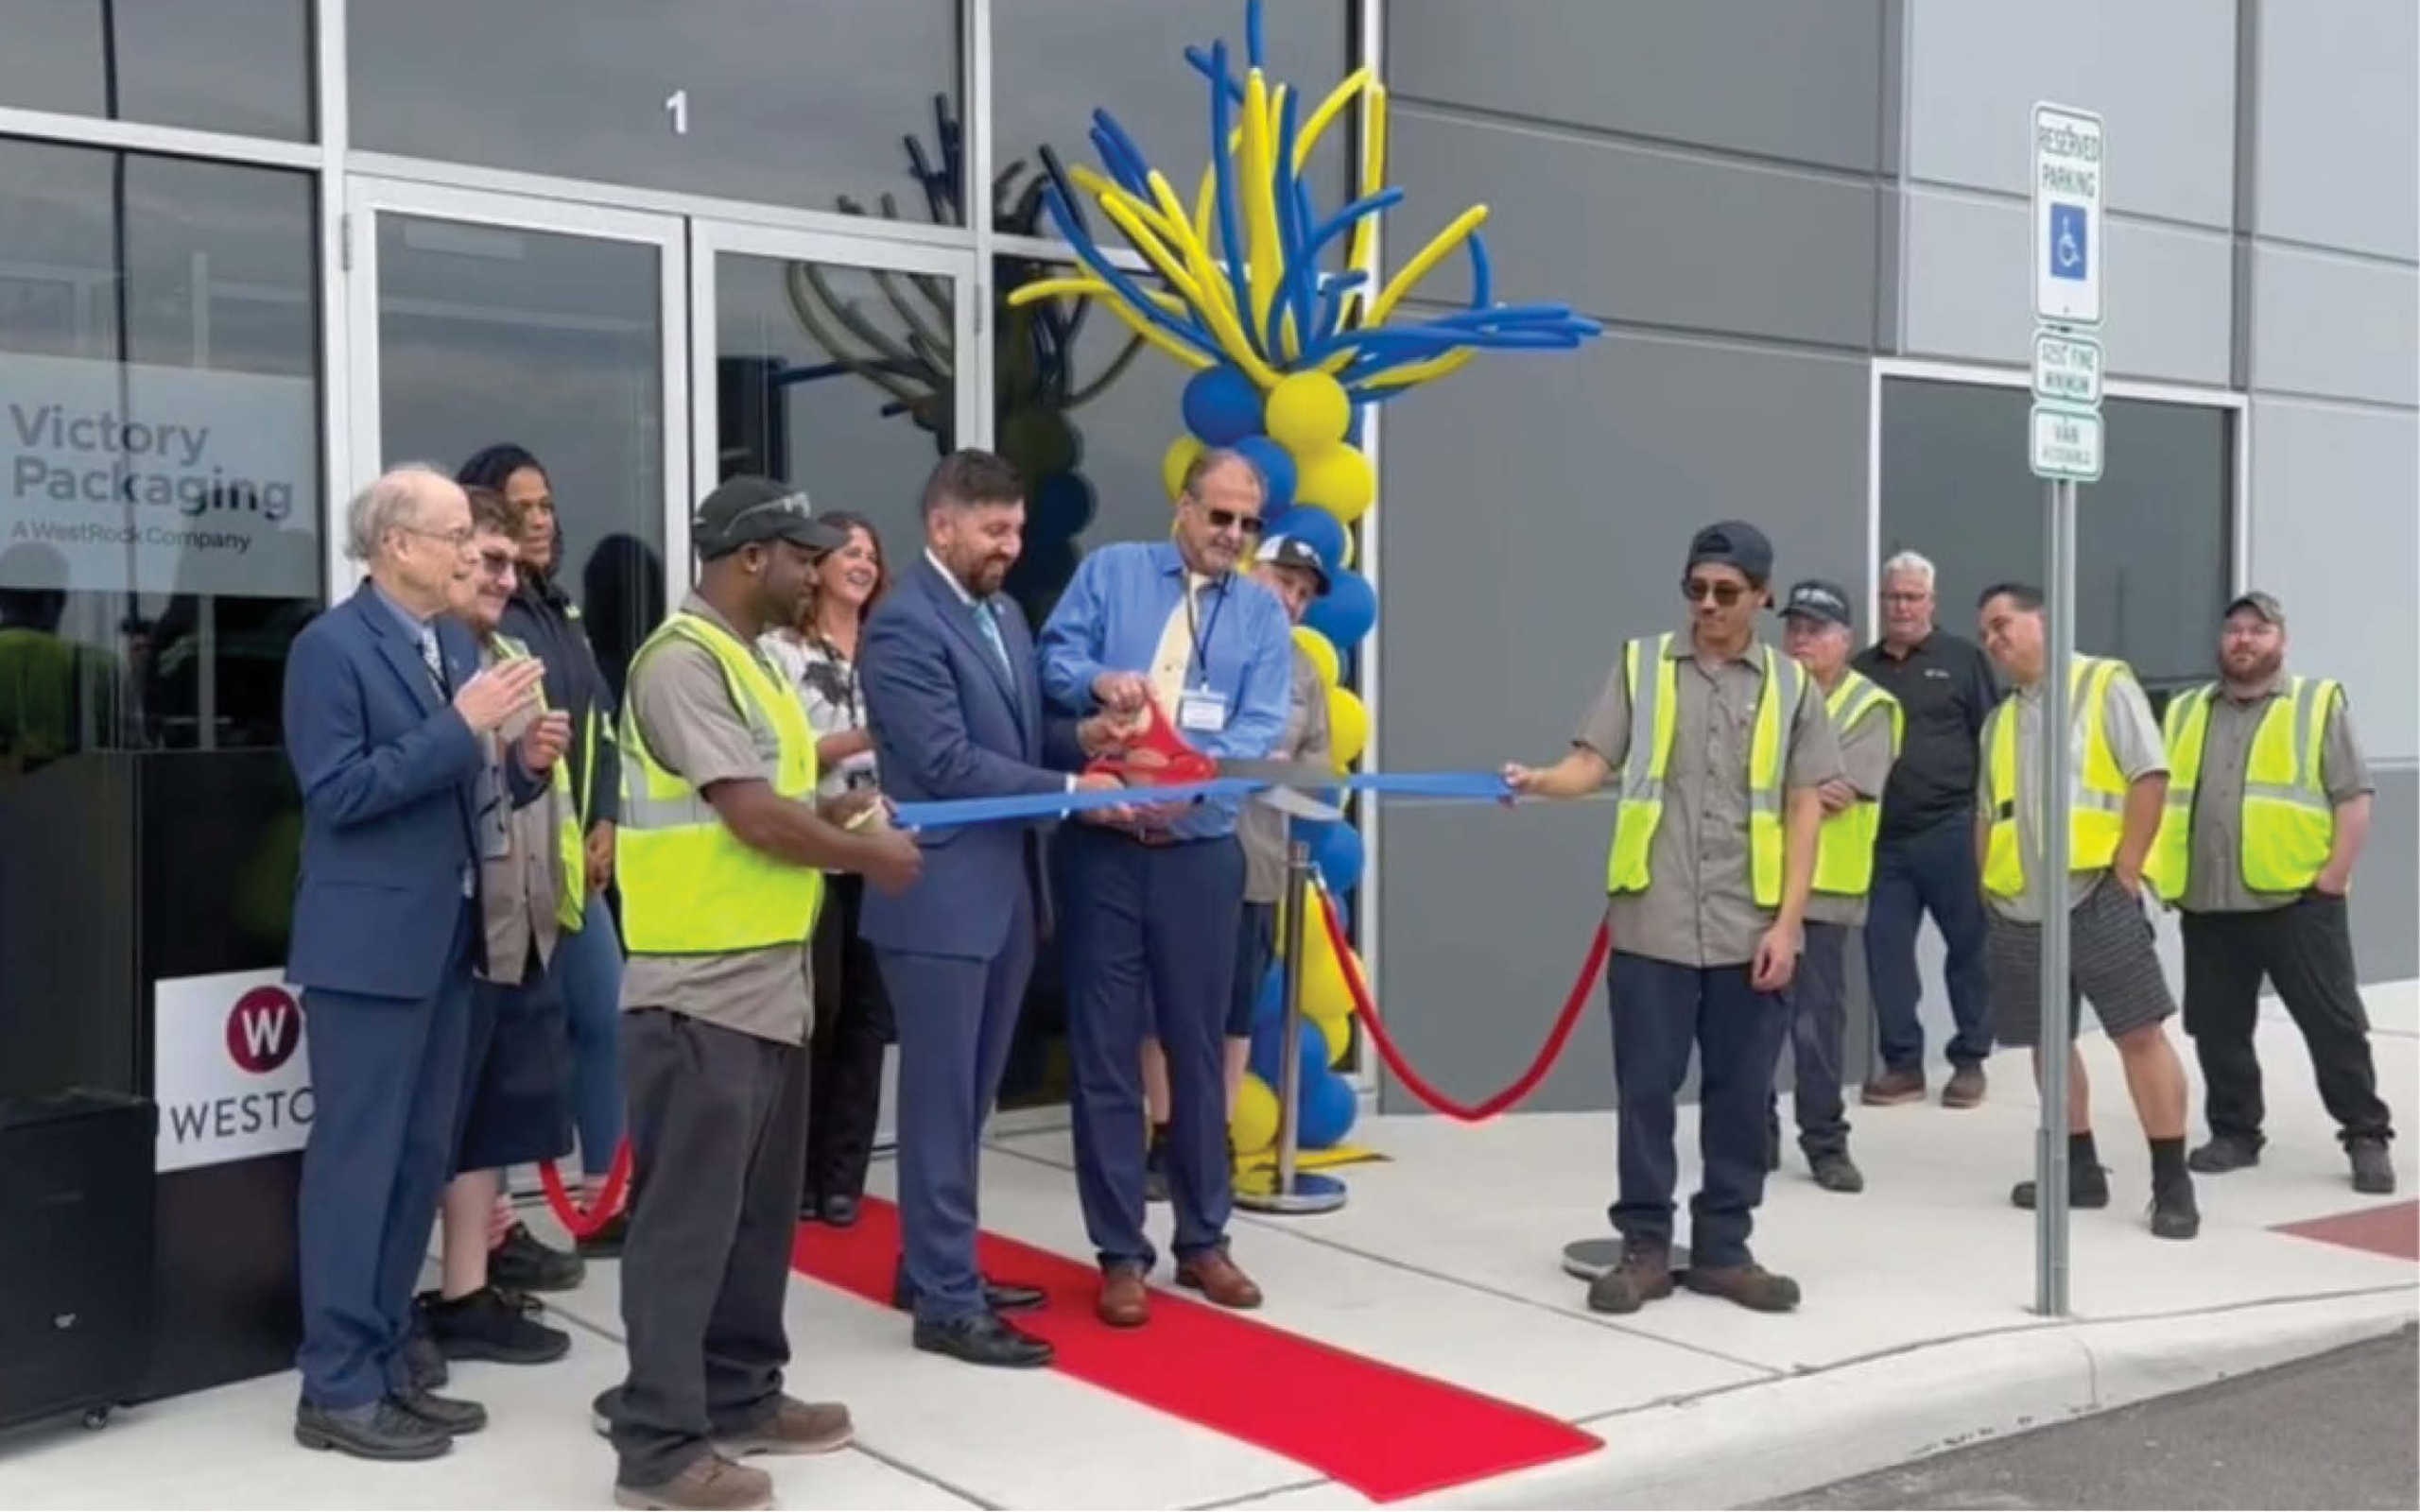 ribbon cutting ceremony at Victory Packaging